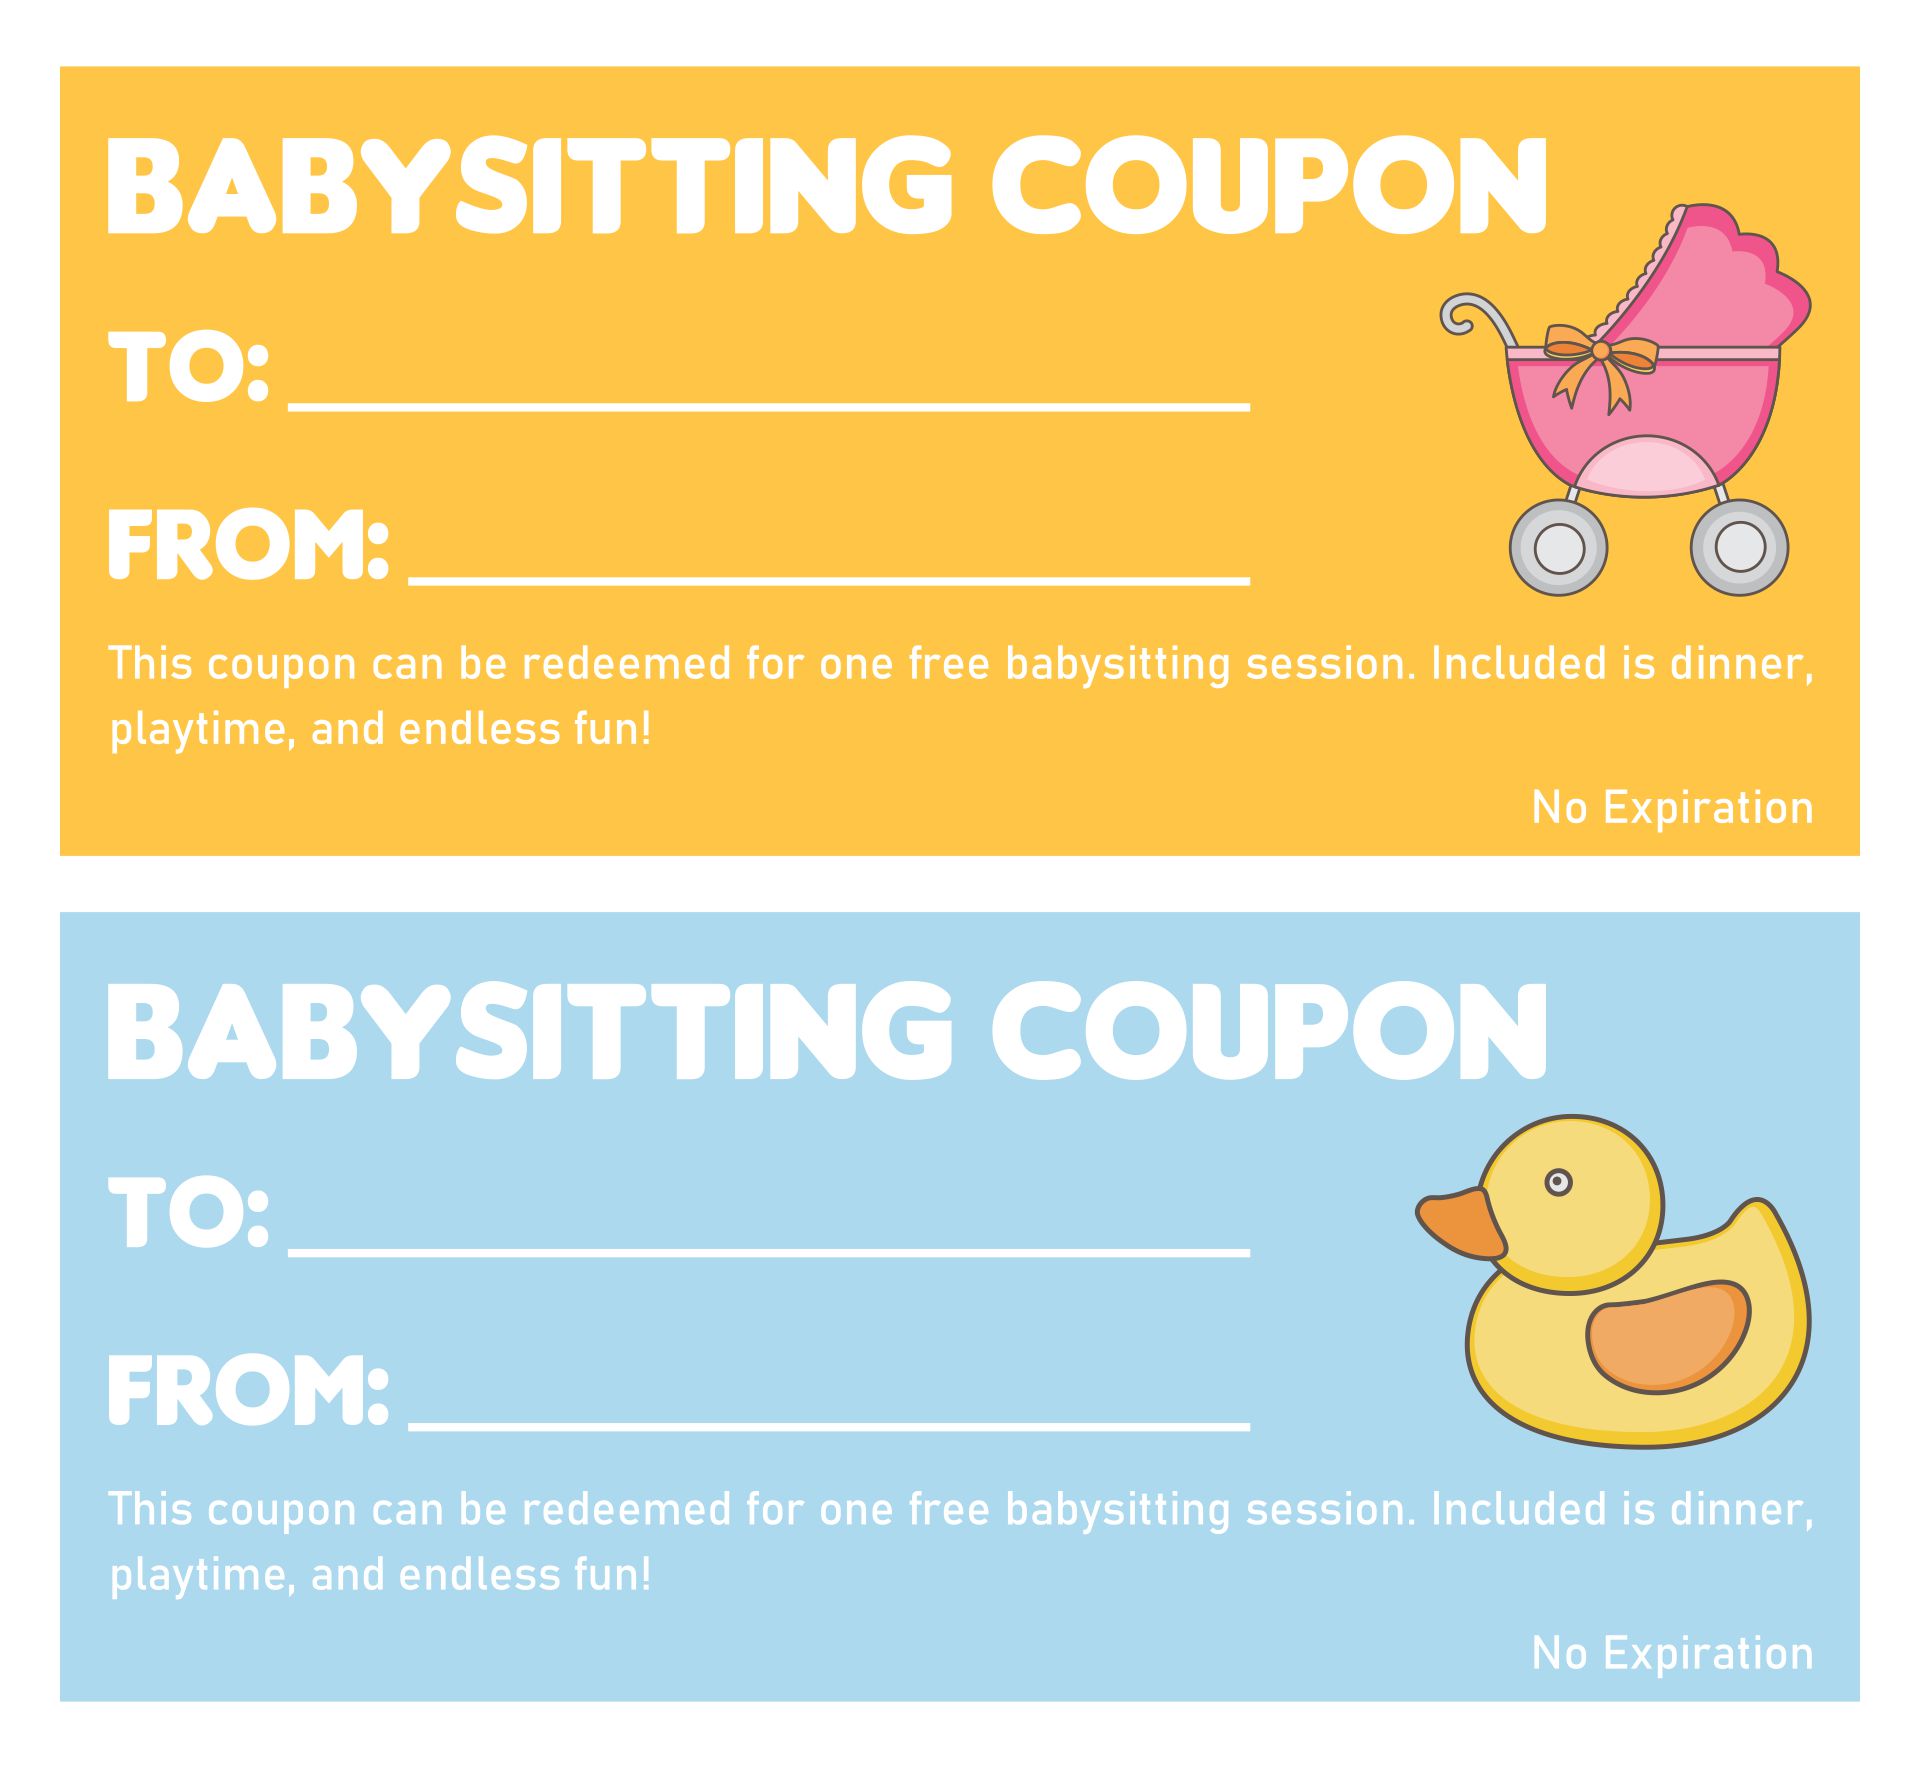 printable-babysitting-coupon-the-perfect-gift-idea